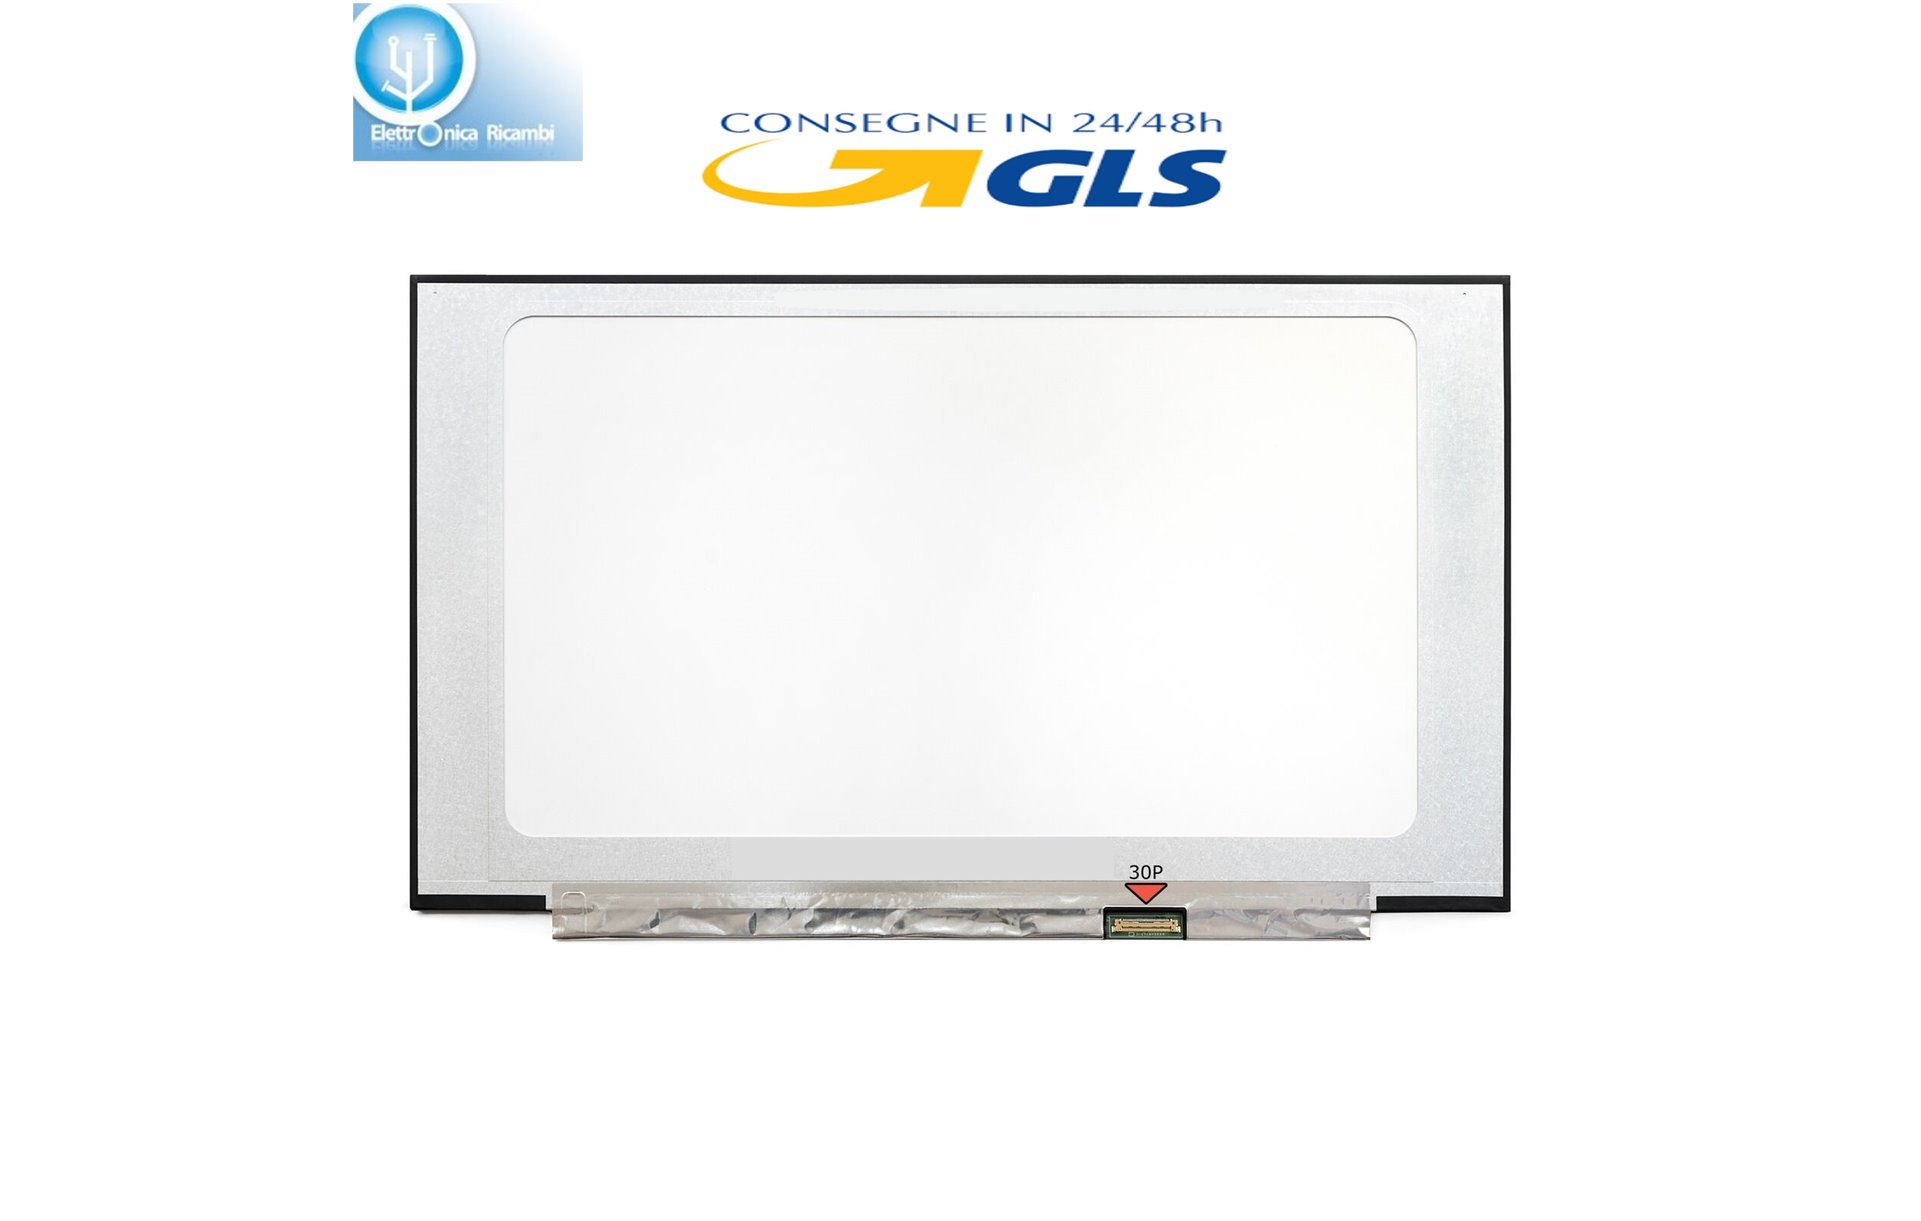 DISPLAY LCD Dell INSPIRON P112F SERIES 15.6 WideScreen (13.6"x7.6")  LED 30 pin IPS